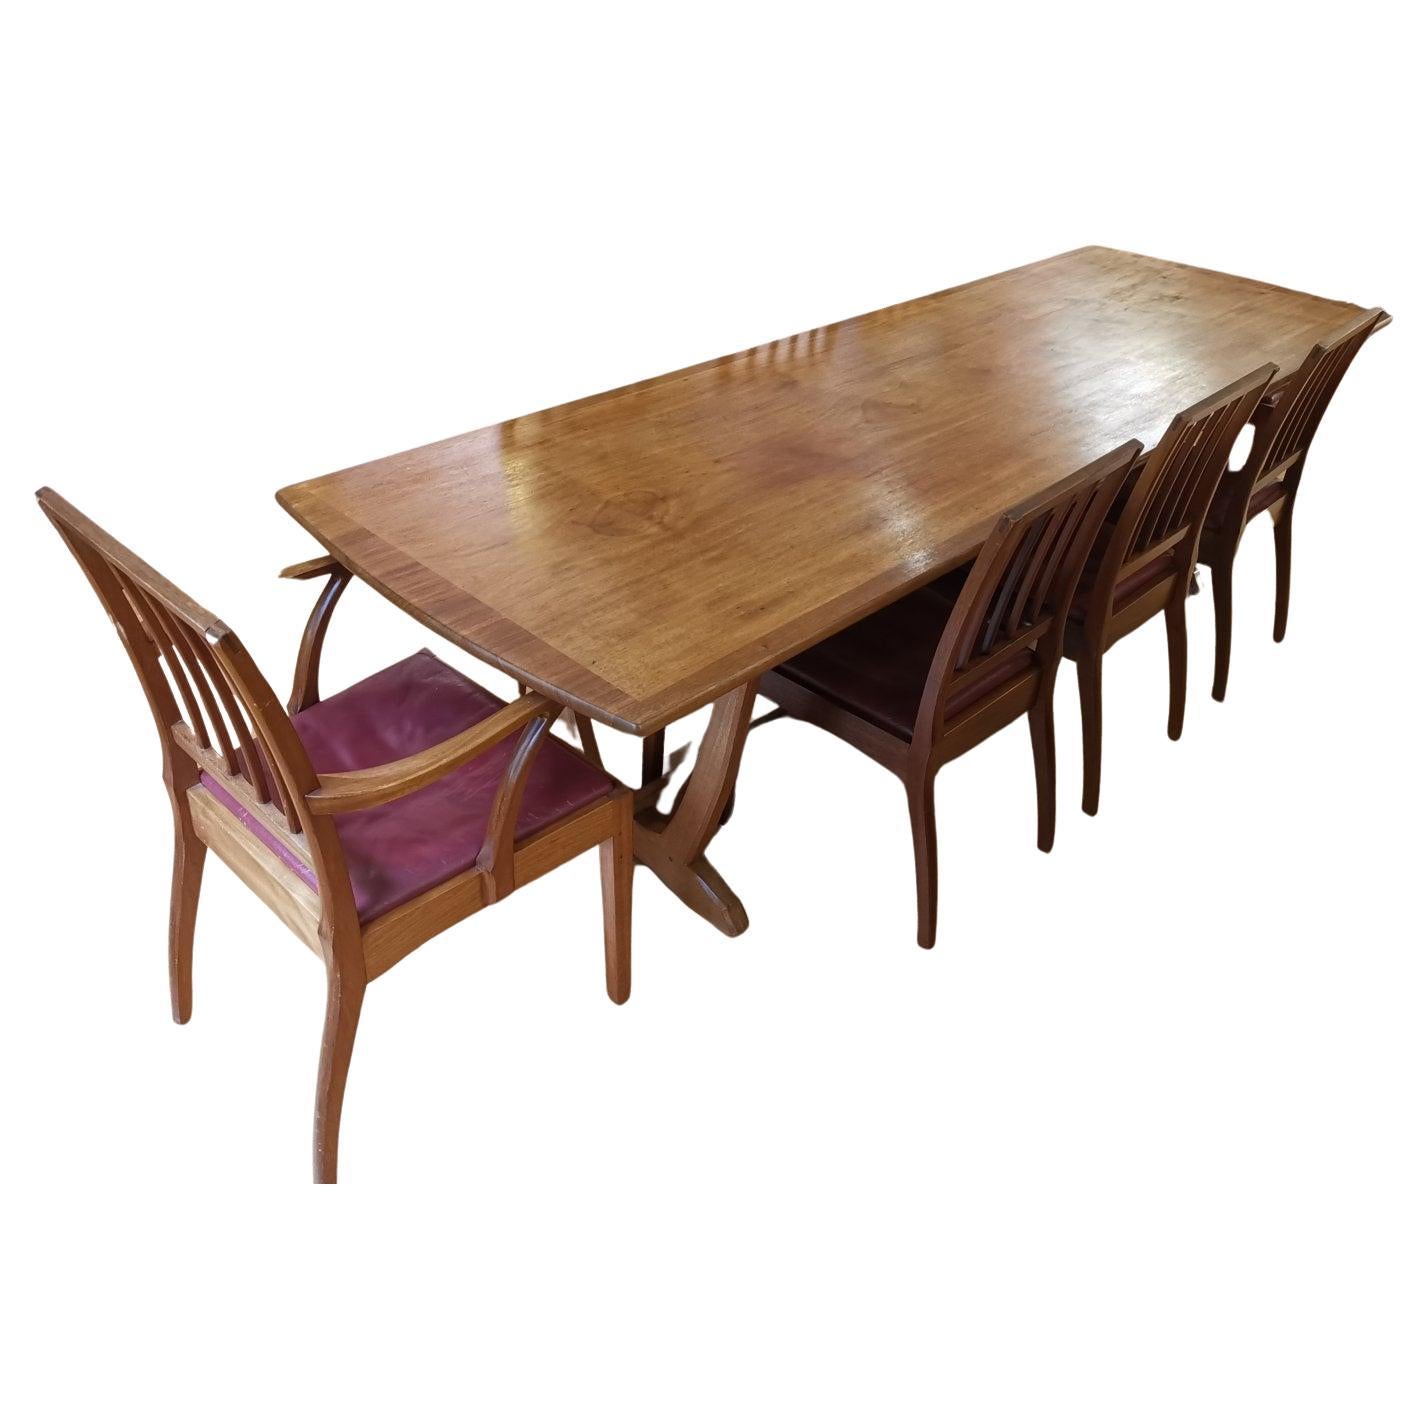 Edward Barnsley. An Arts & Crafts Walnut dining table & eight matching chairs. For Sale